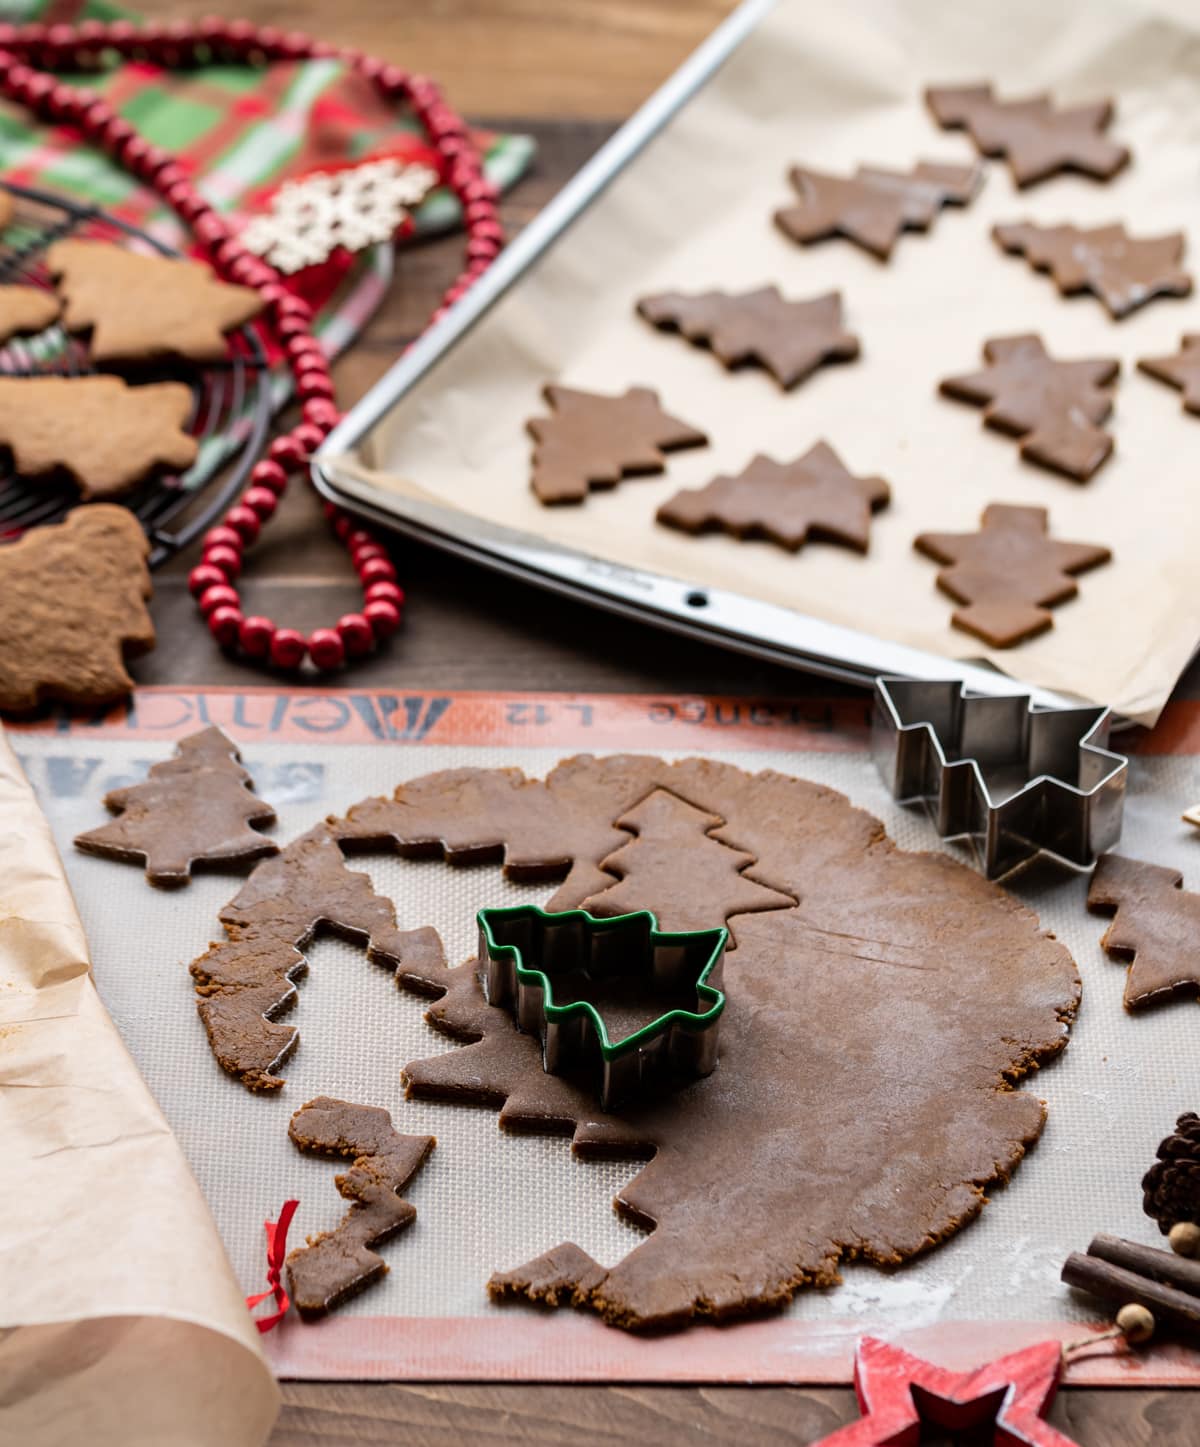 gingerbread cookie dough with Christmas tree shaped cookie cutter, cut out cookies on a baking tray